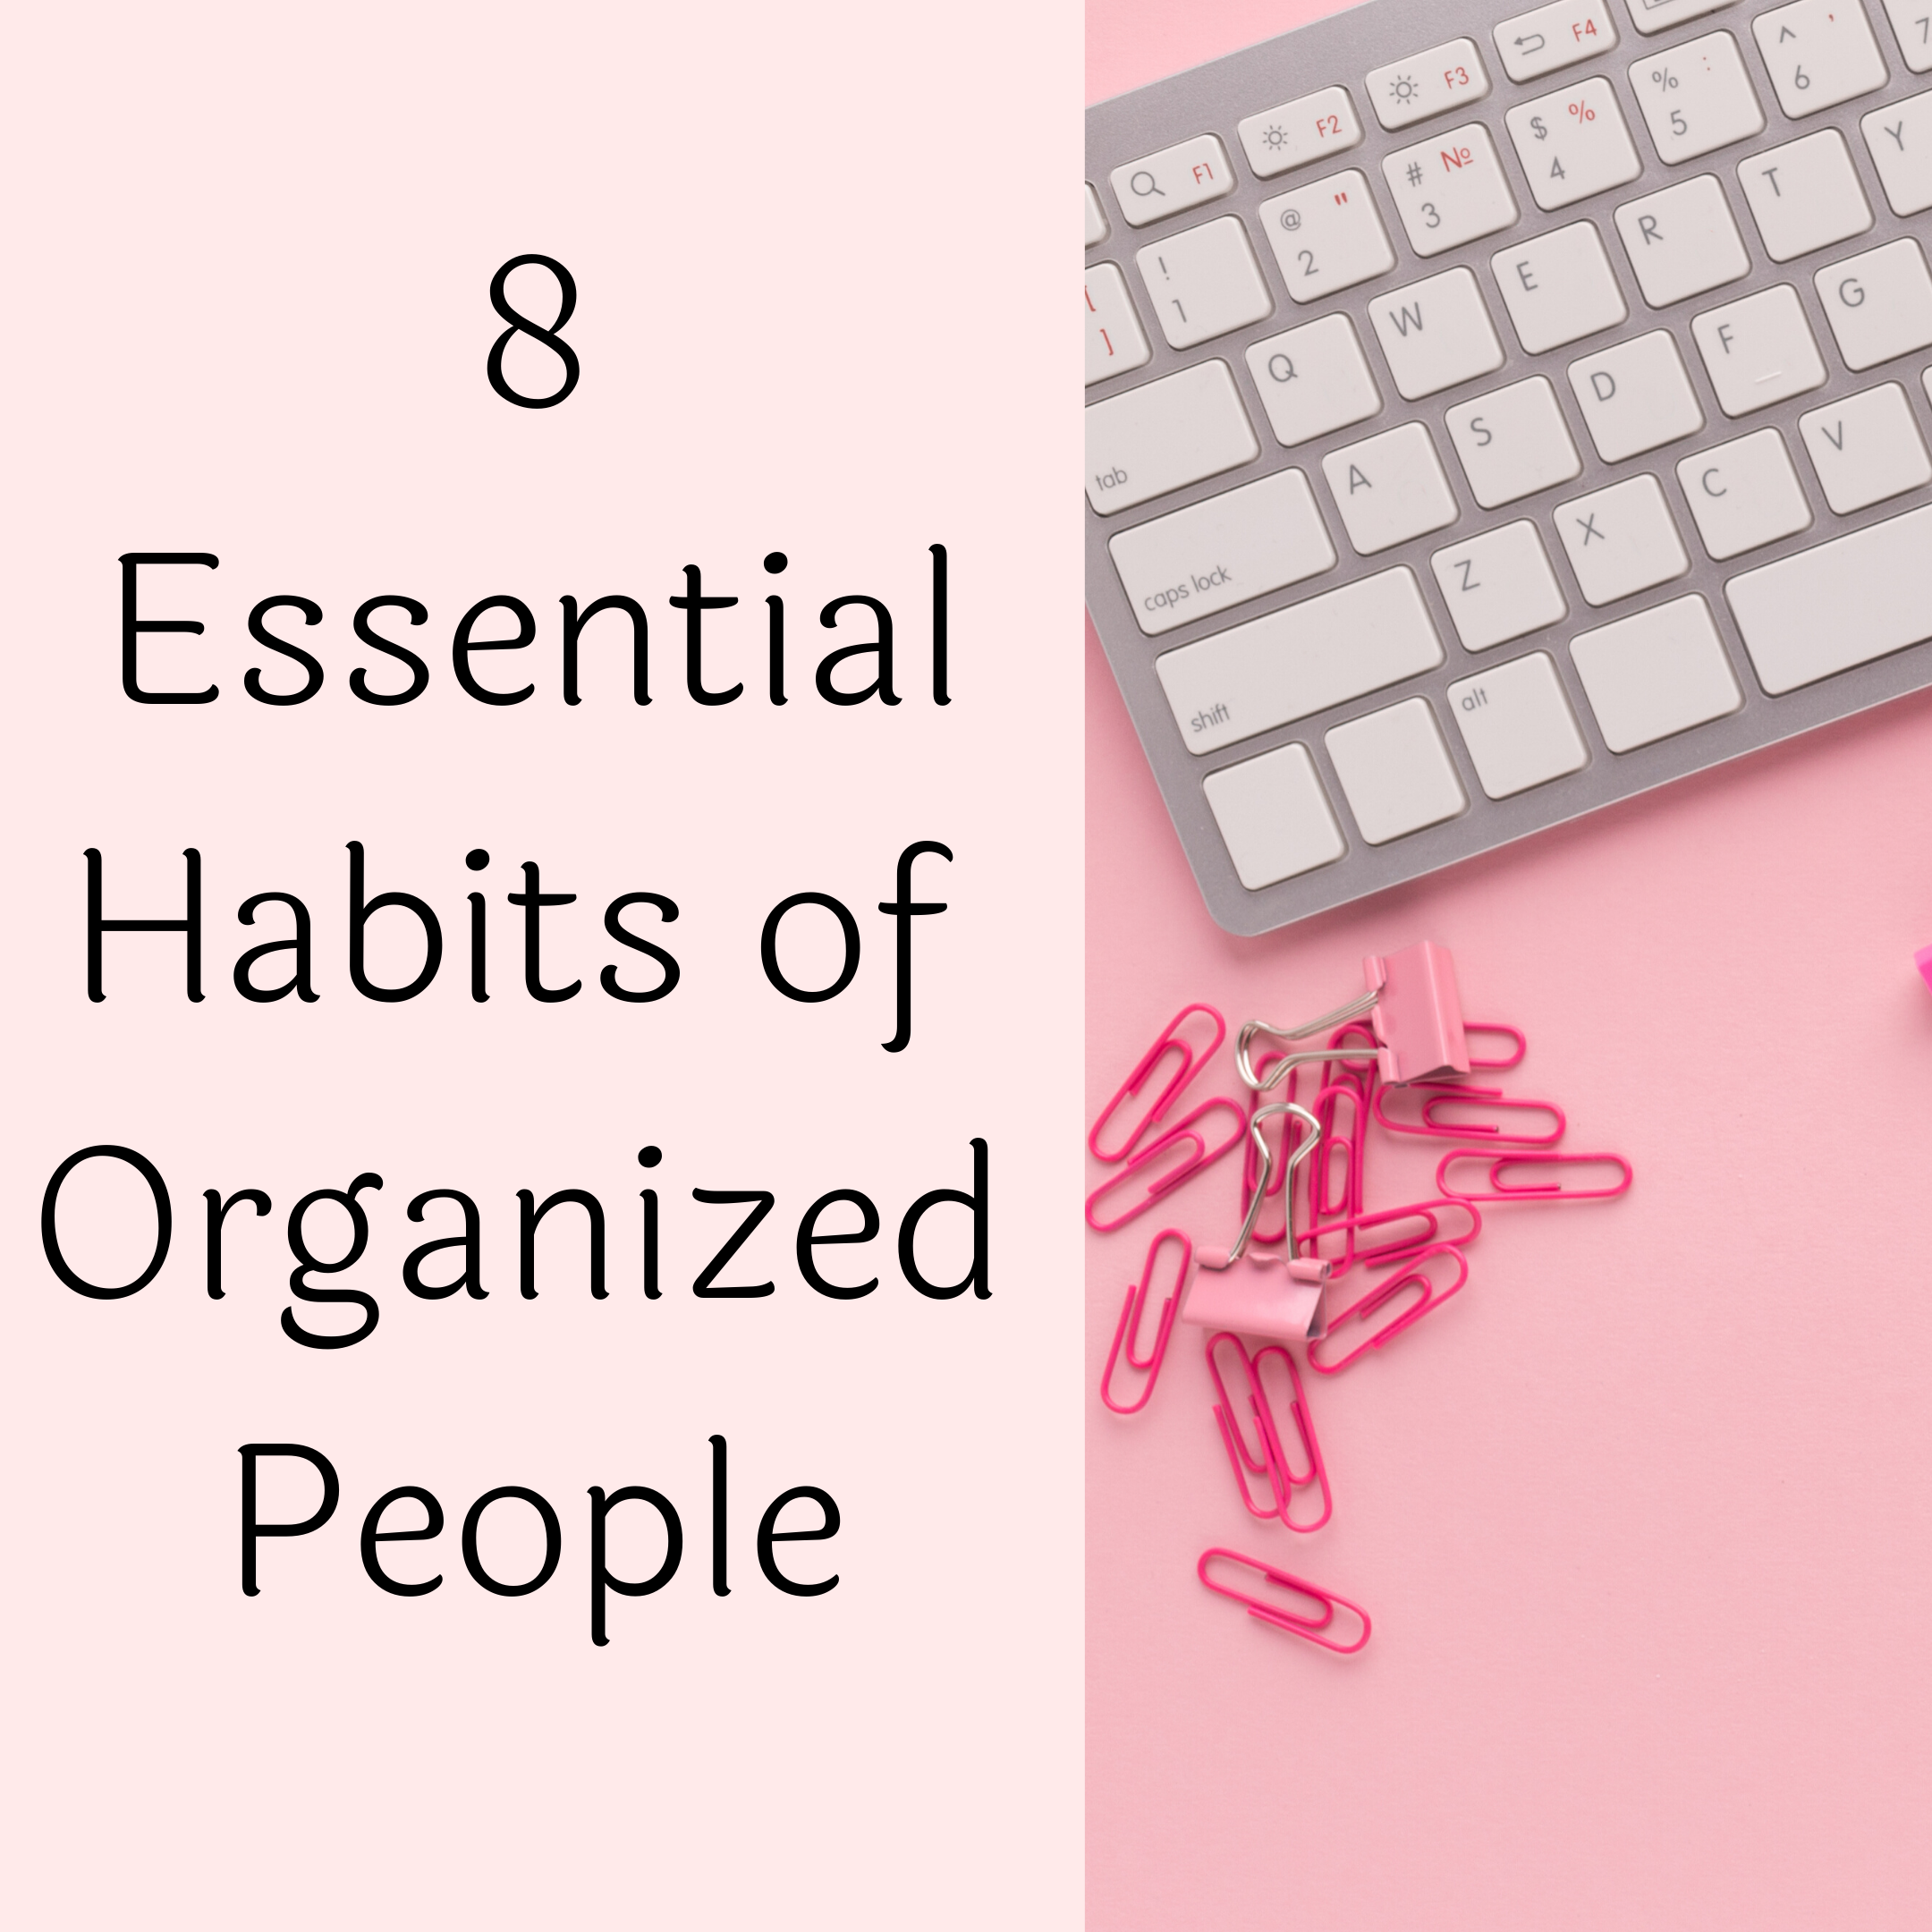 8 Essential Habits of Organized People